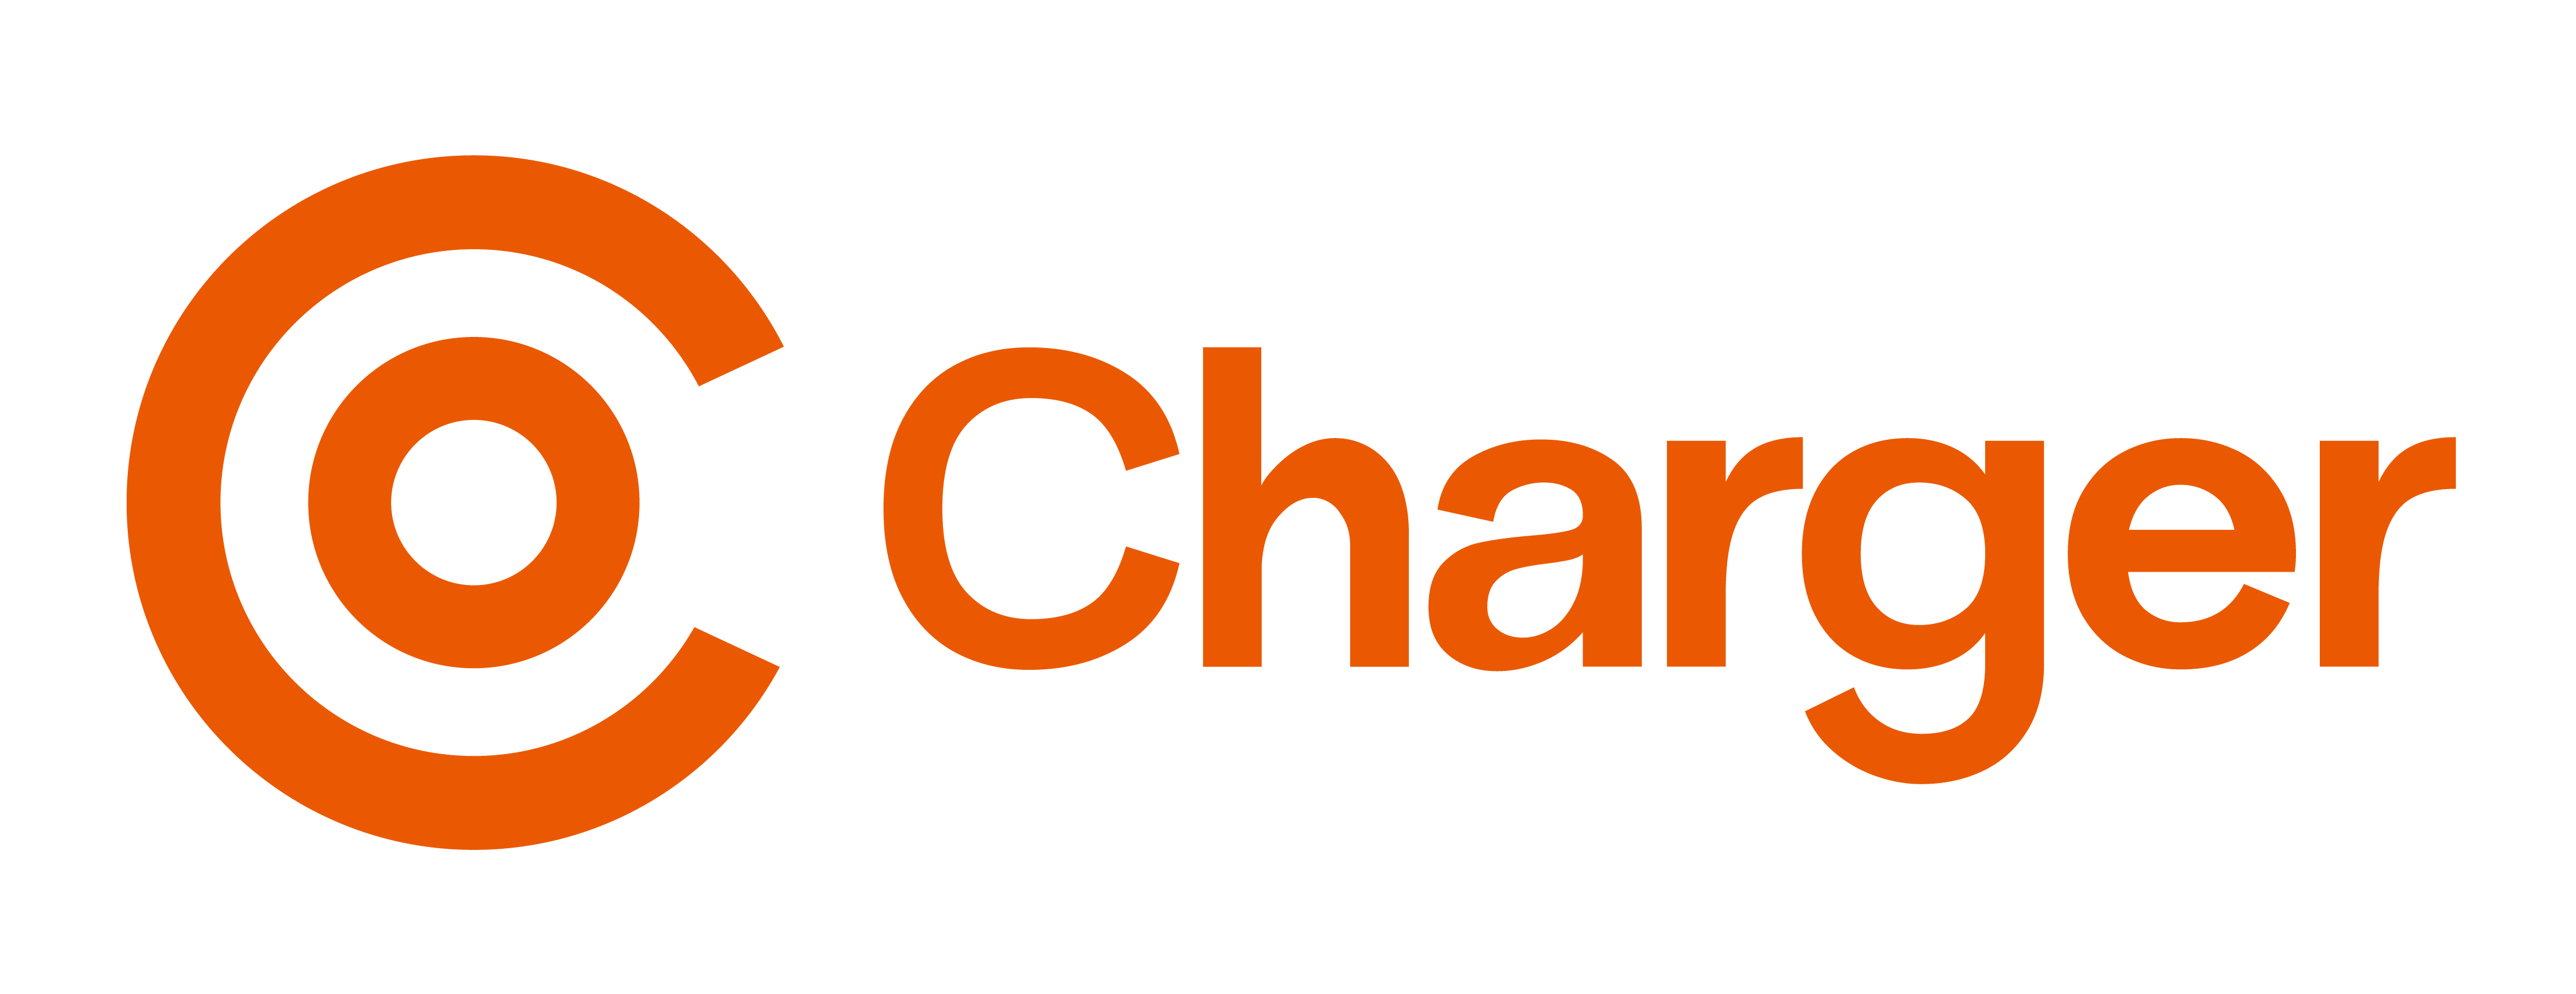 Organisation Logo - Co Charger Limited